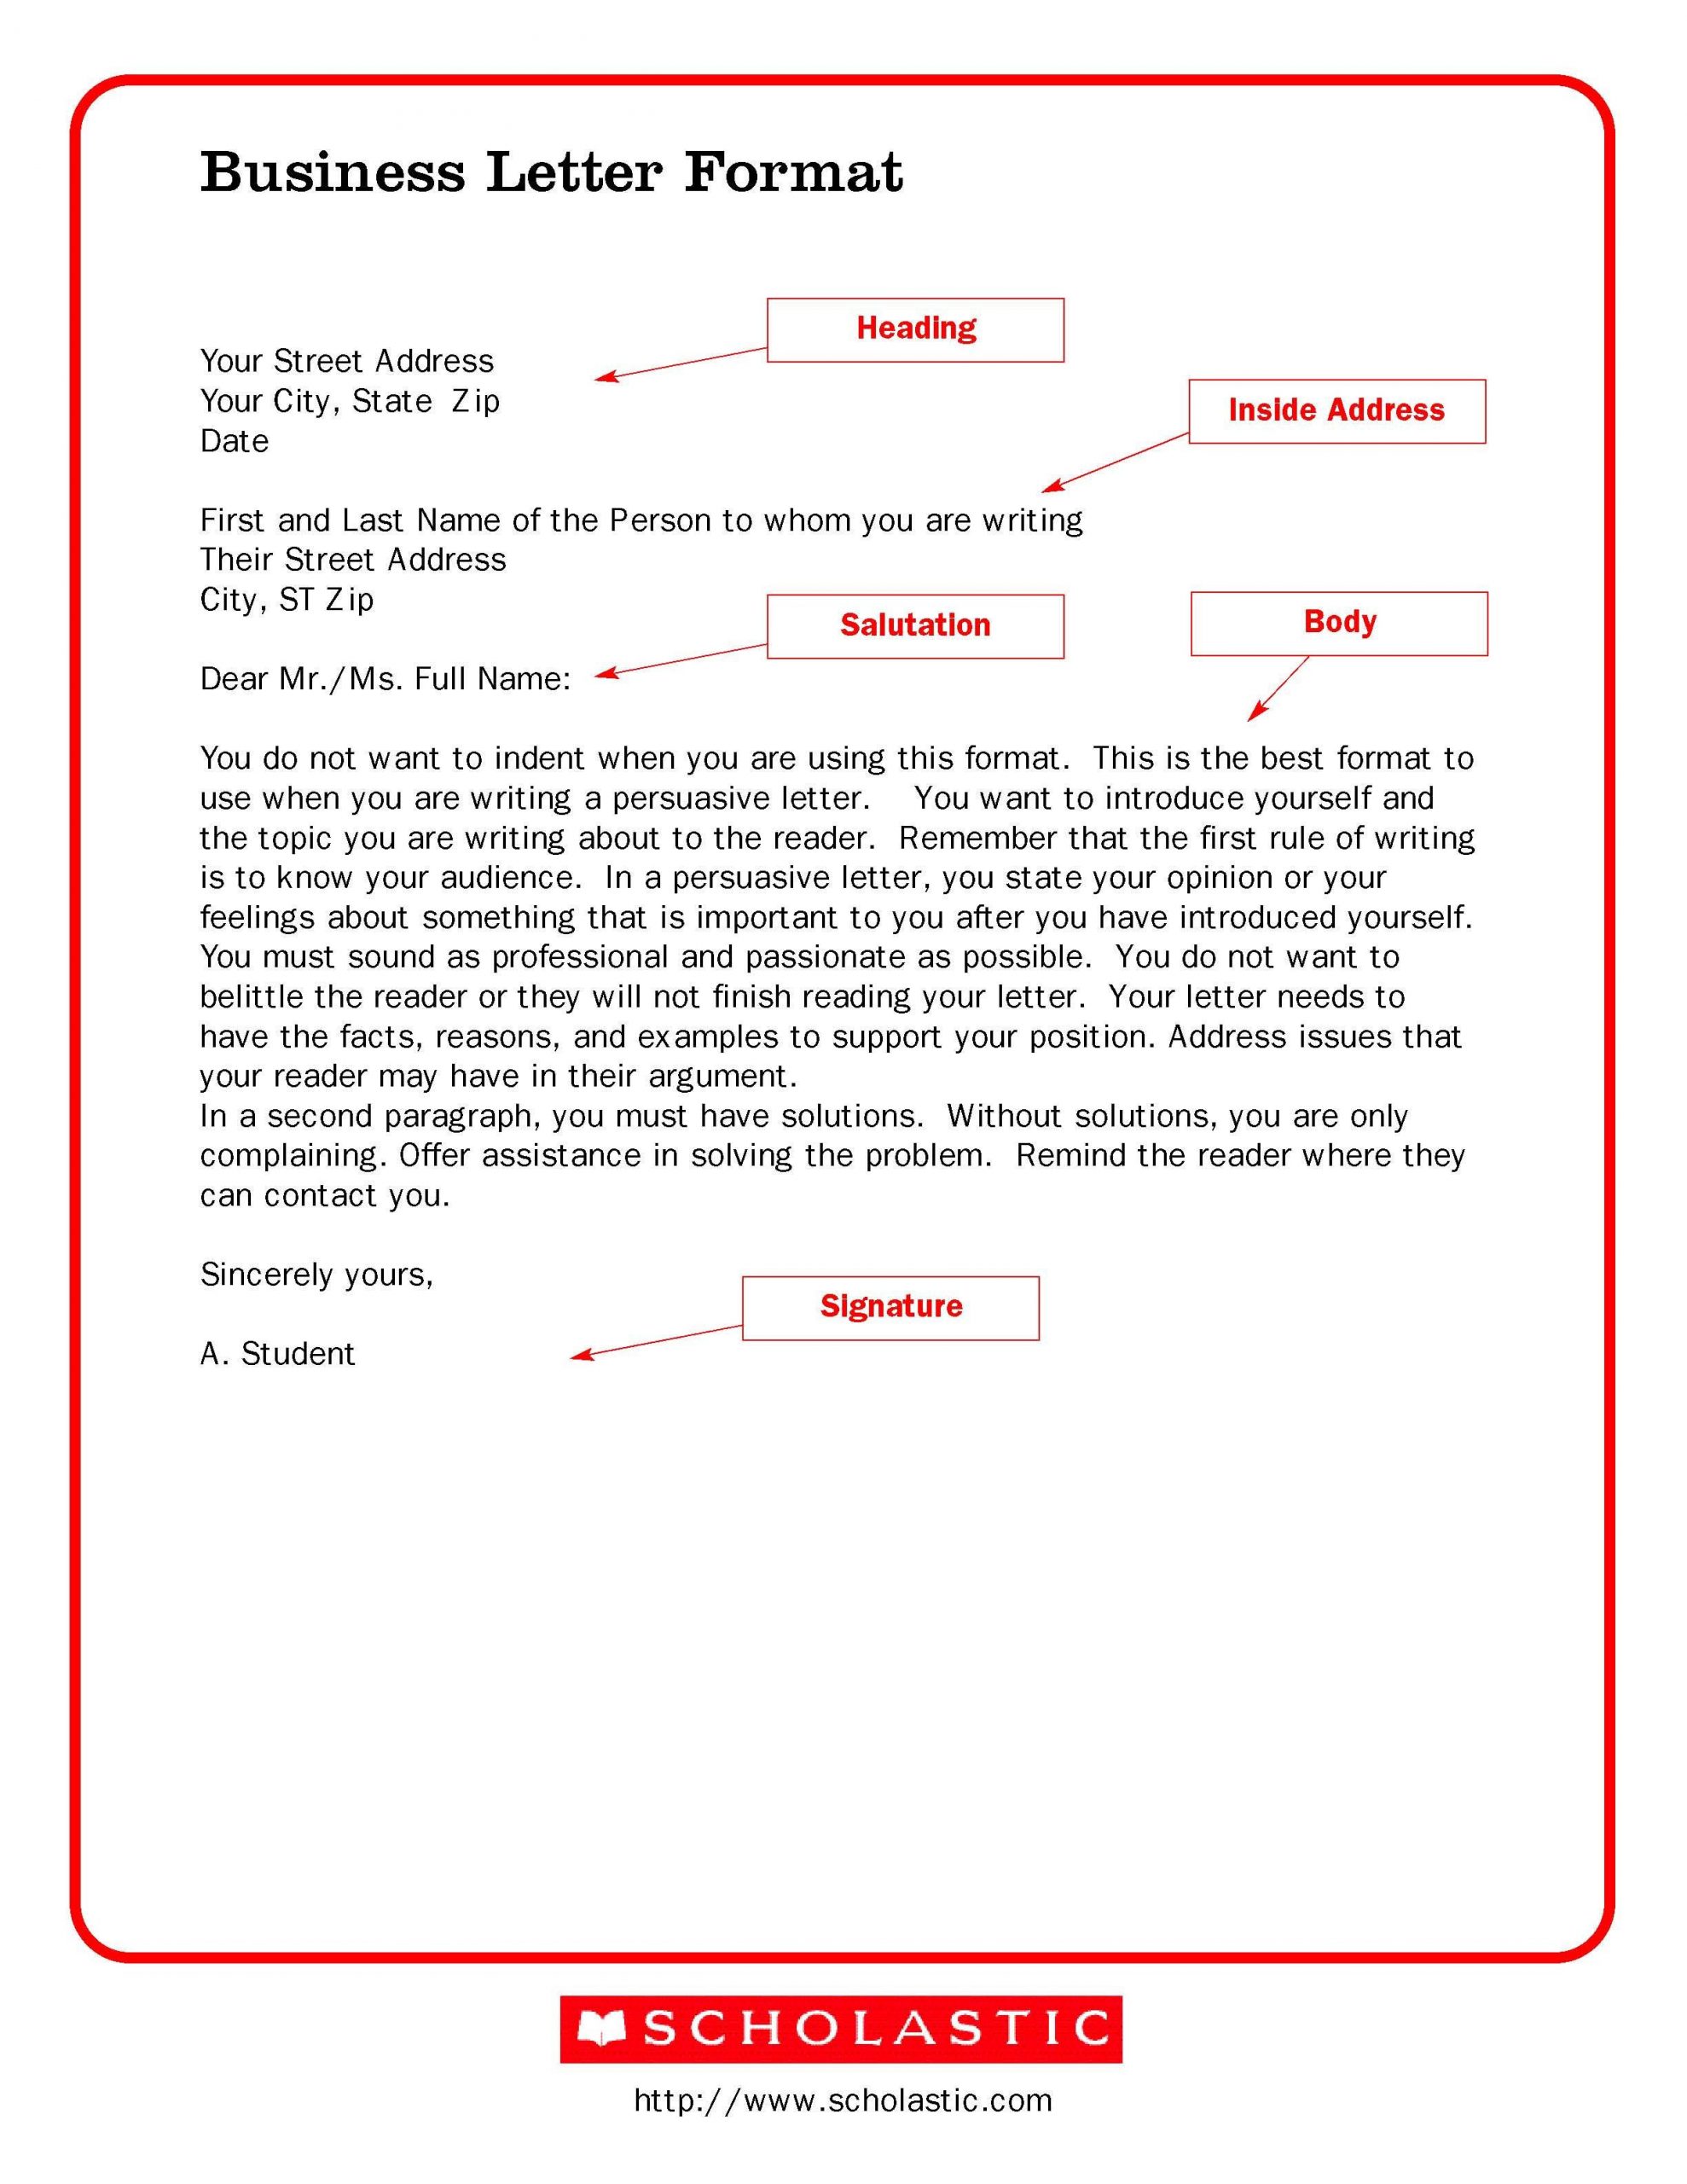 Business form Letter Template Sample Business Letters and forms Sample Standard